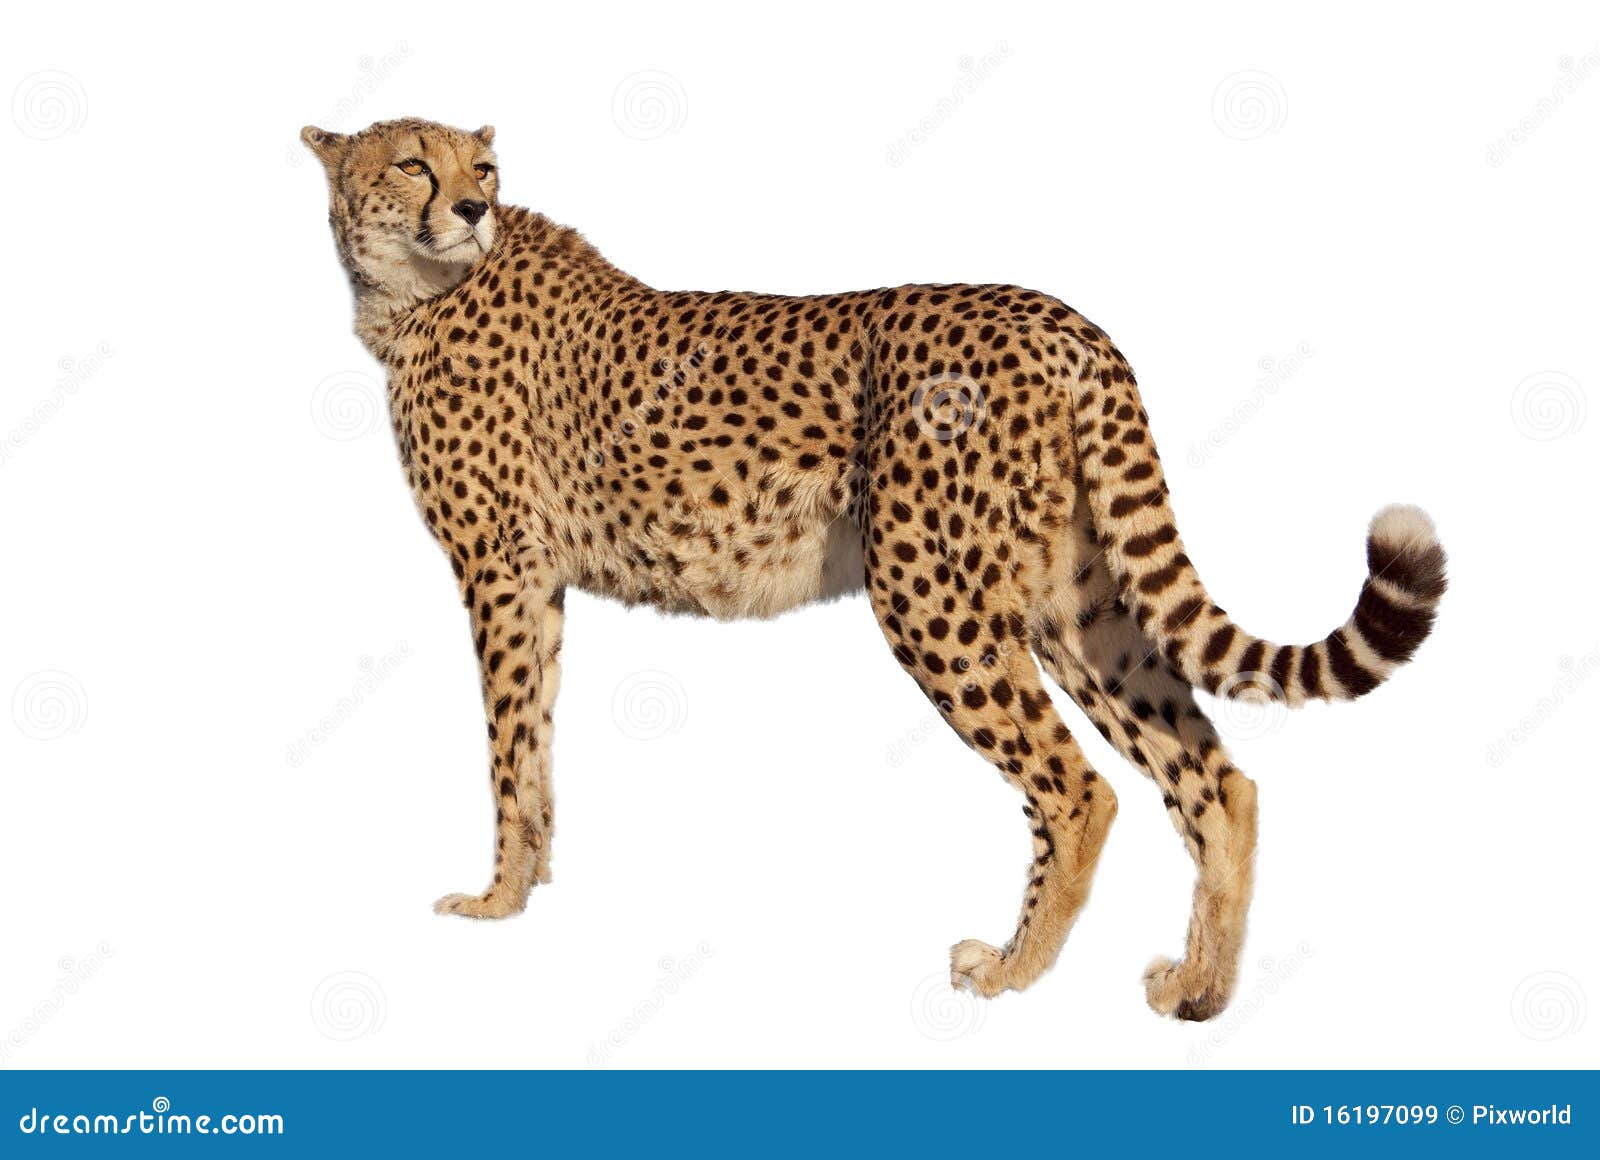 Cheetah with White Background Stock Image - Image of hunt, looking ...